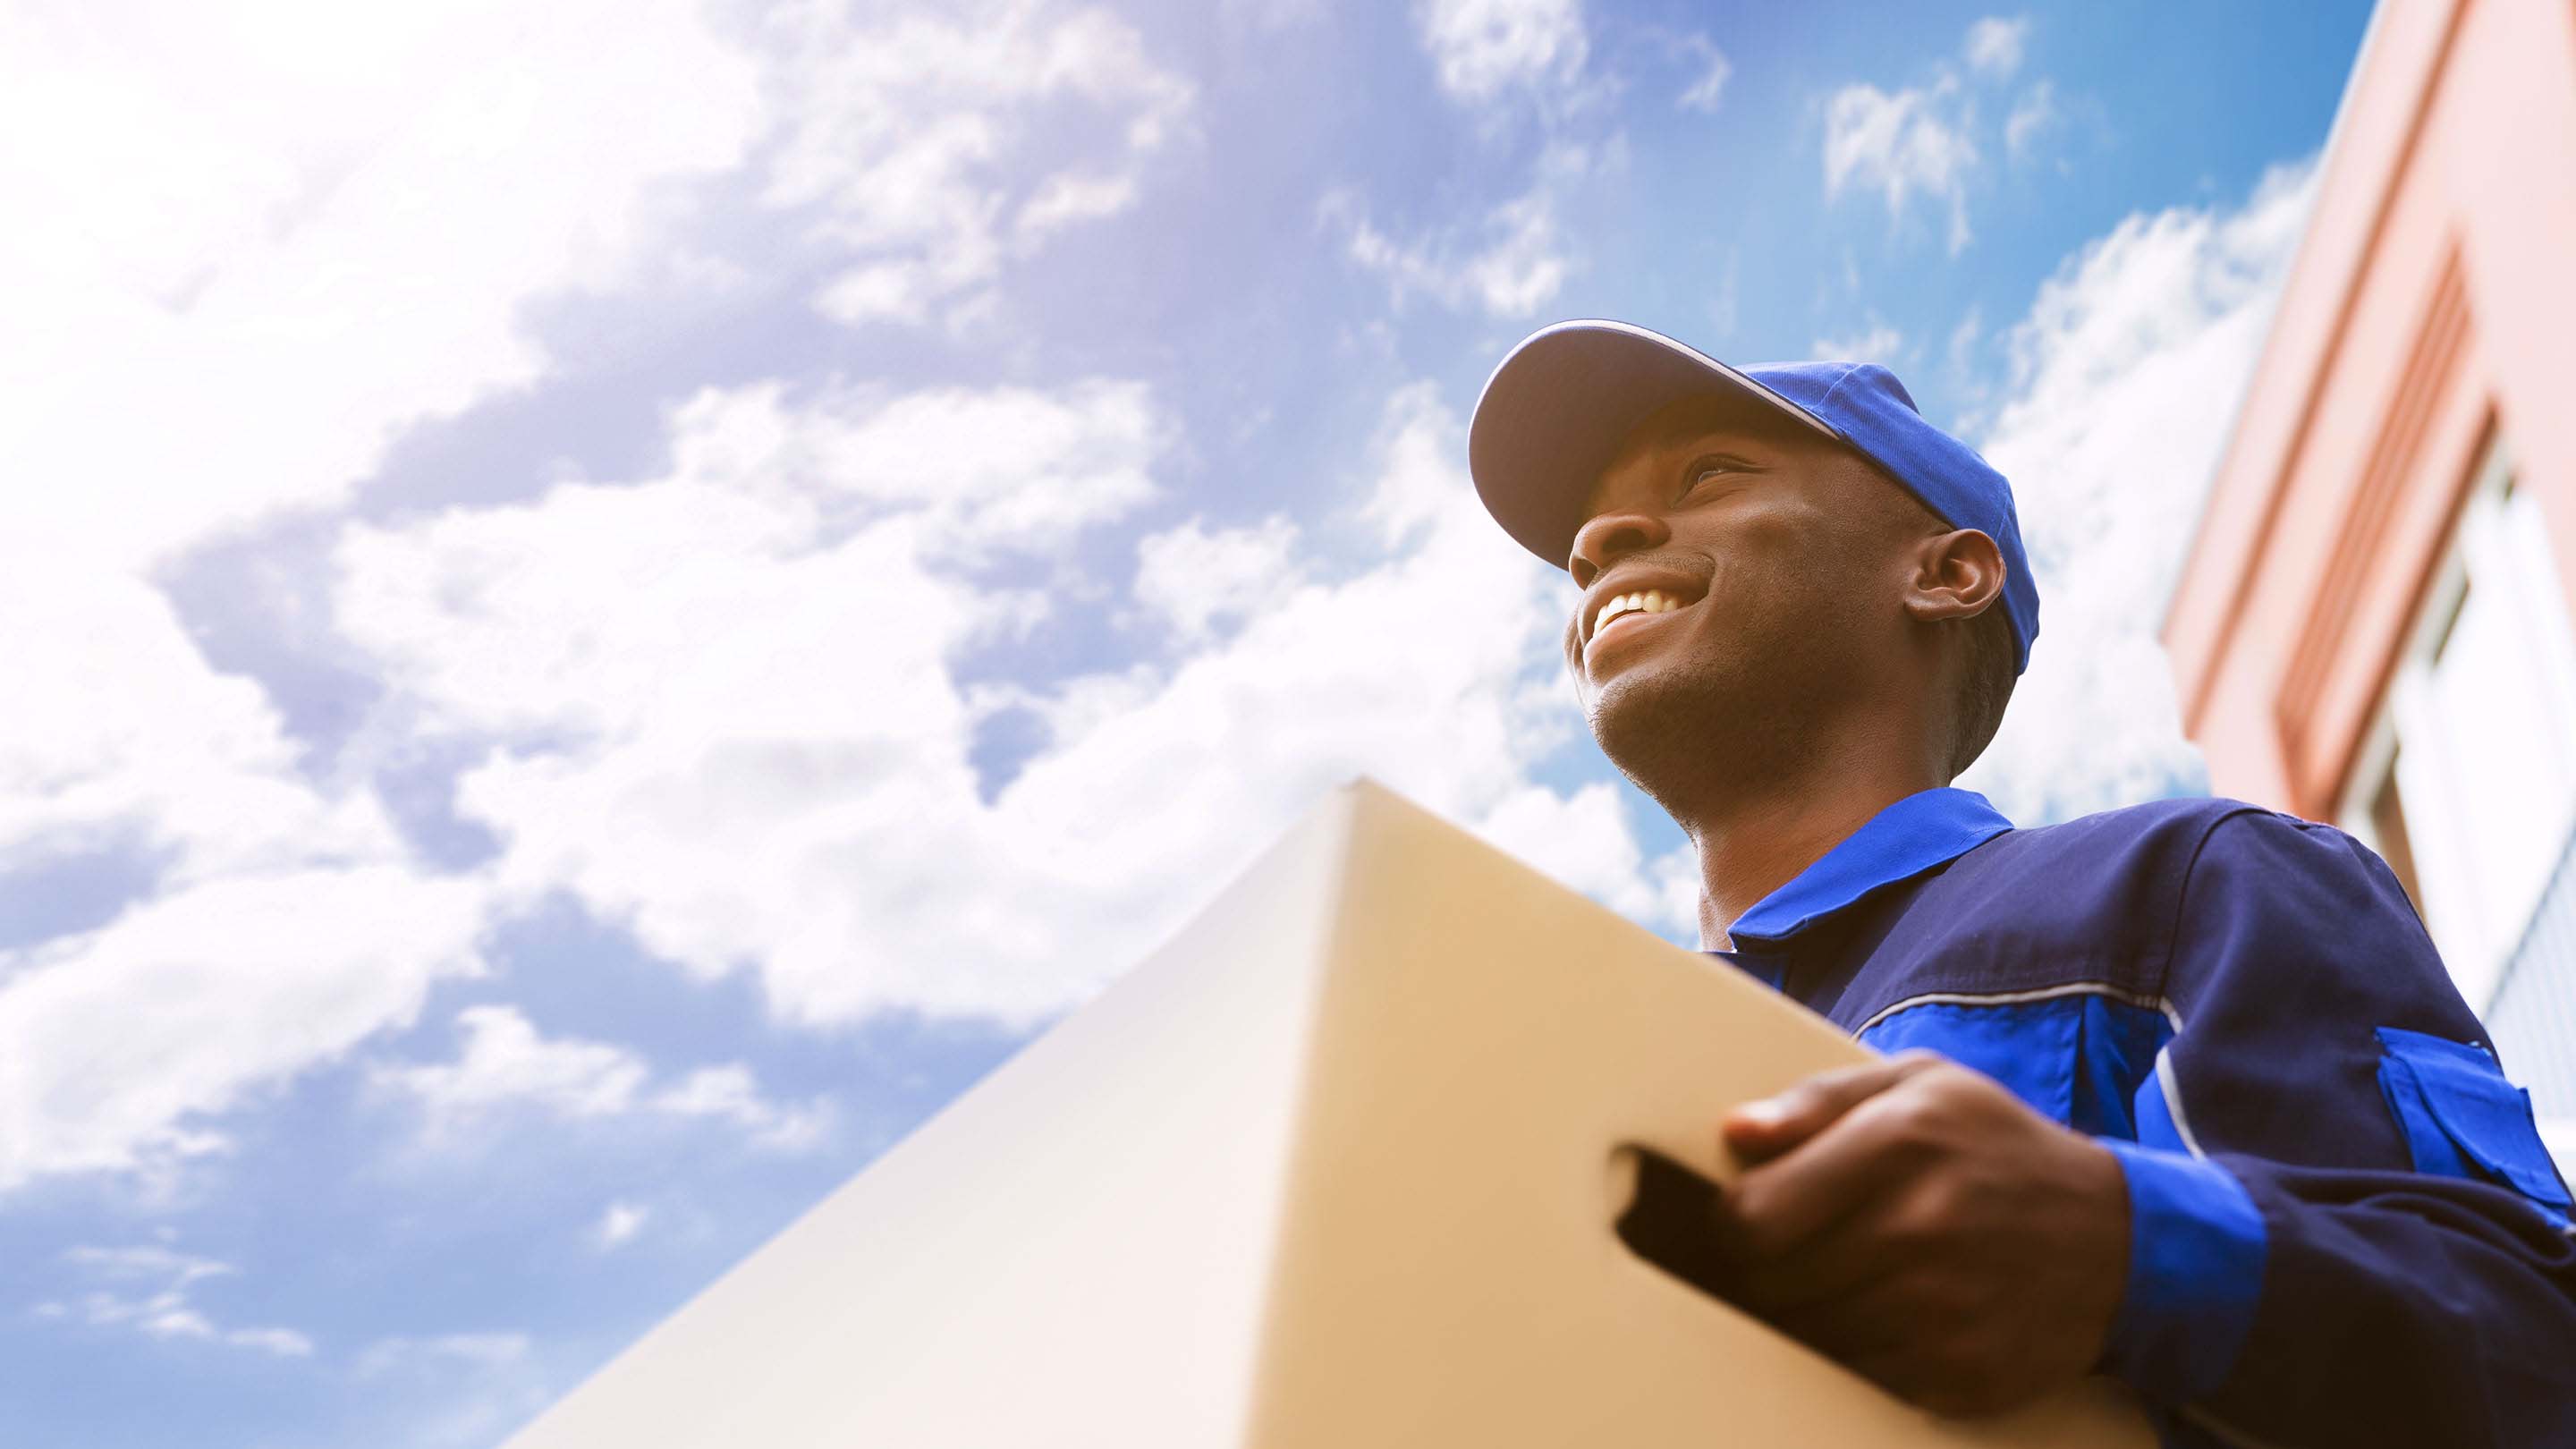 Delivery person with hat delivering a box